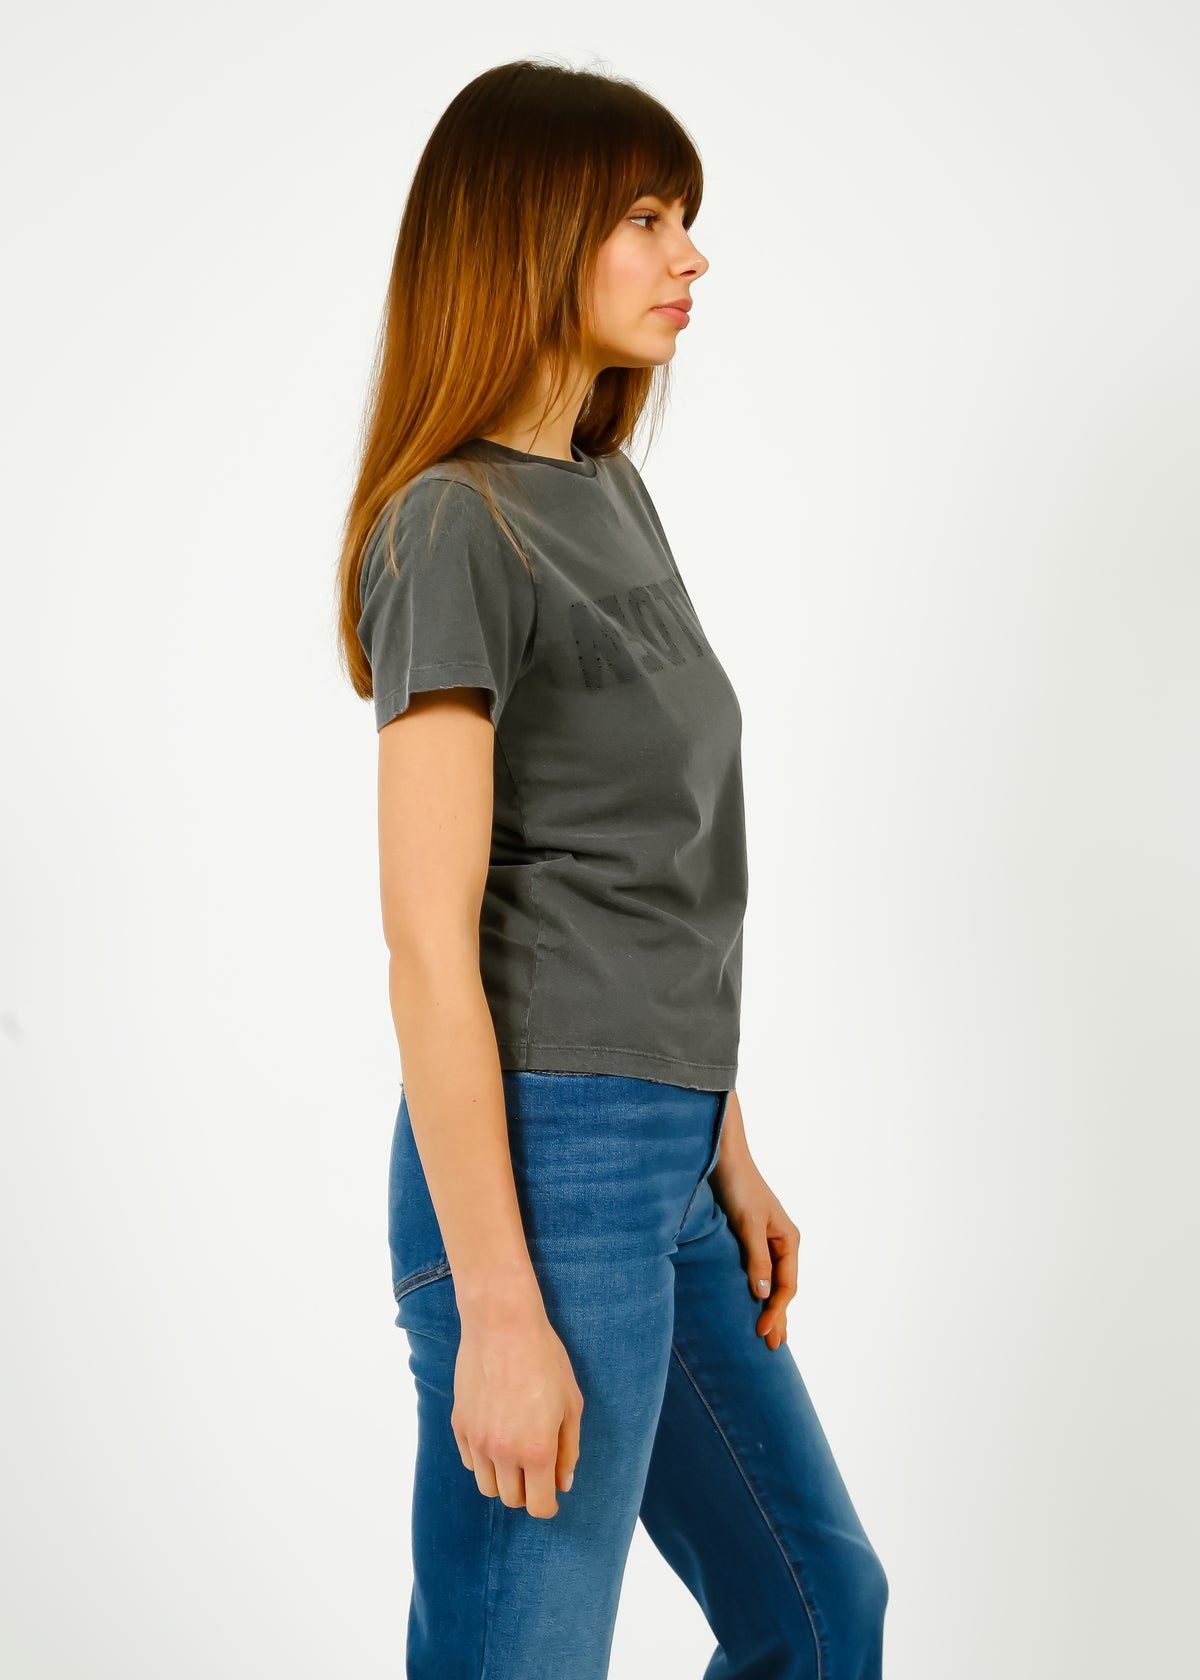 GG Distressed Slim Tee in Anthracite